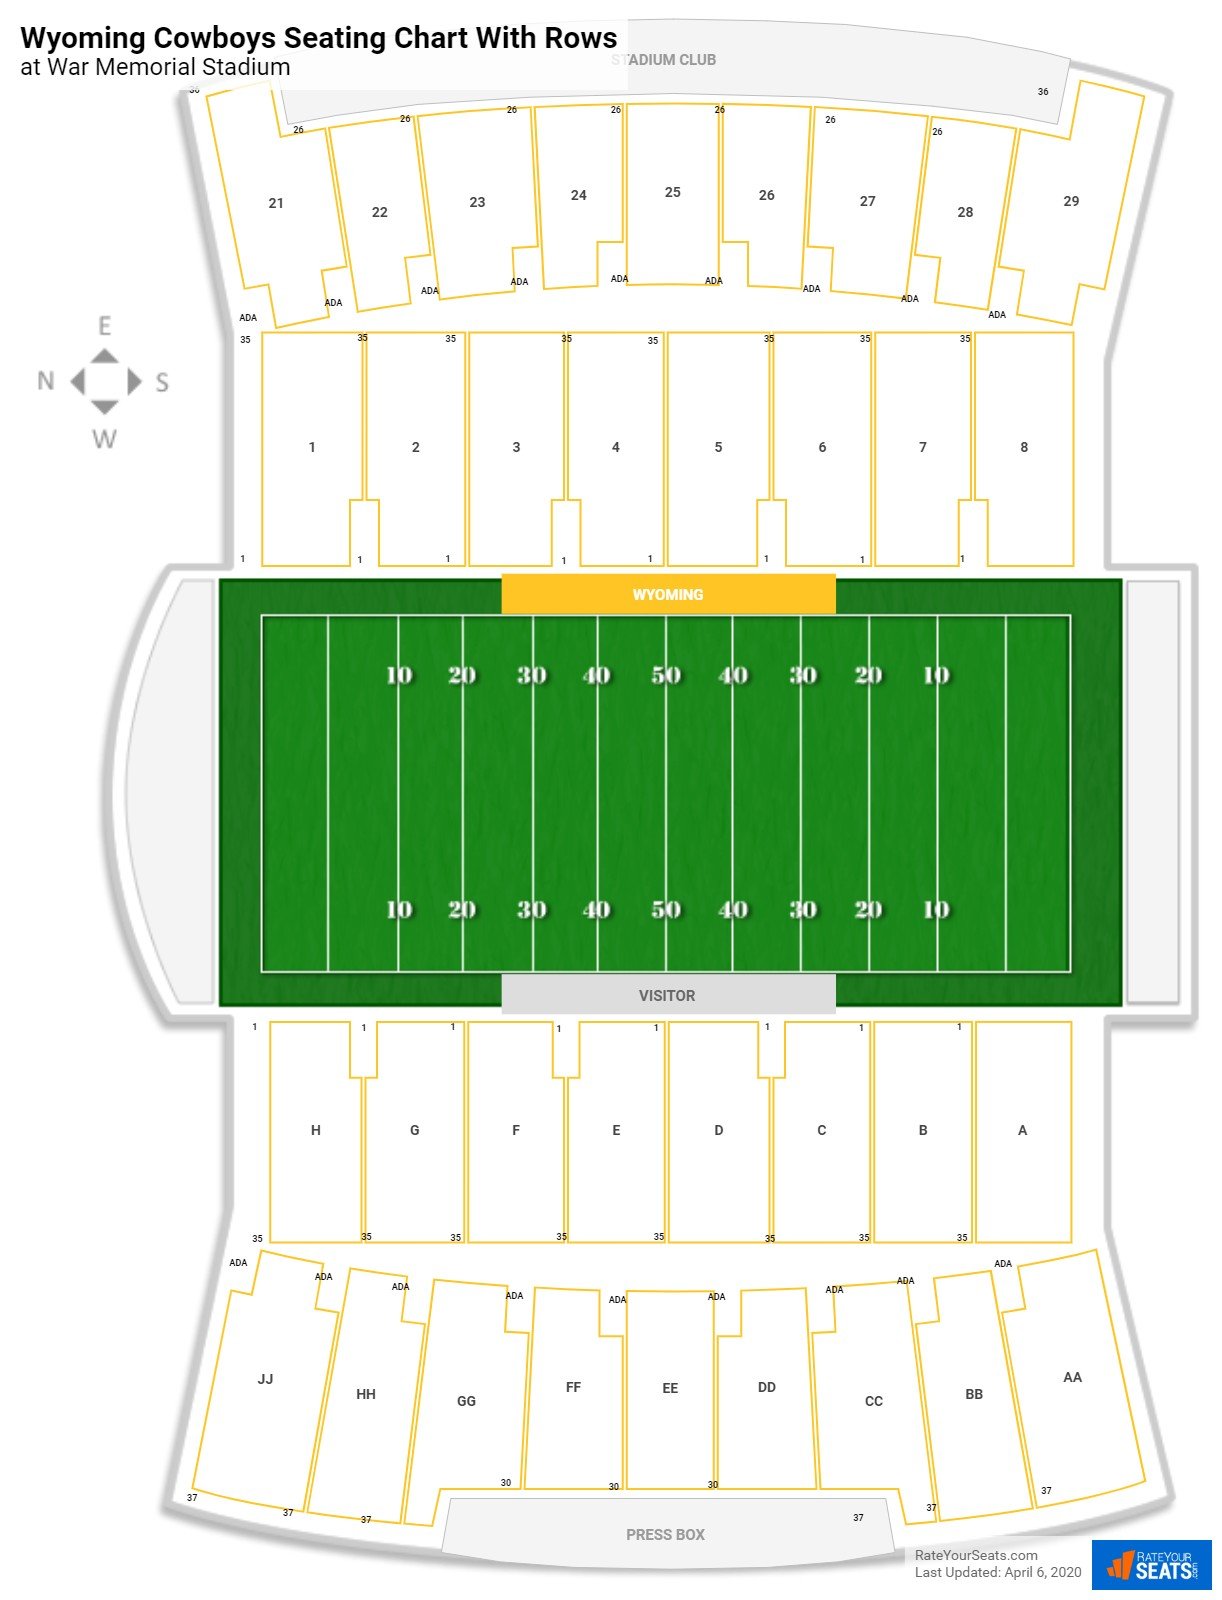 War Memorial Stadium seating chart with row numbers